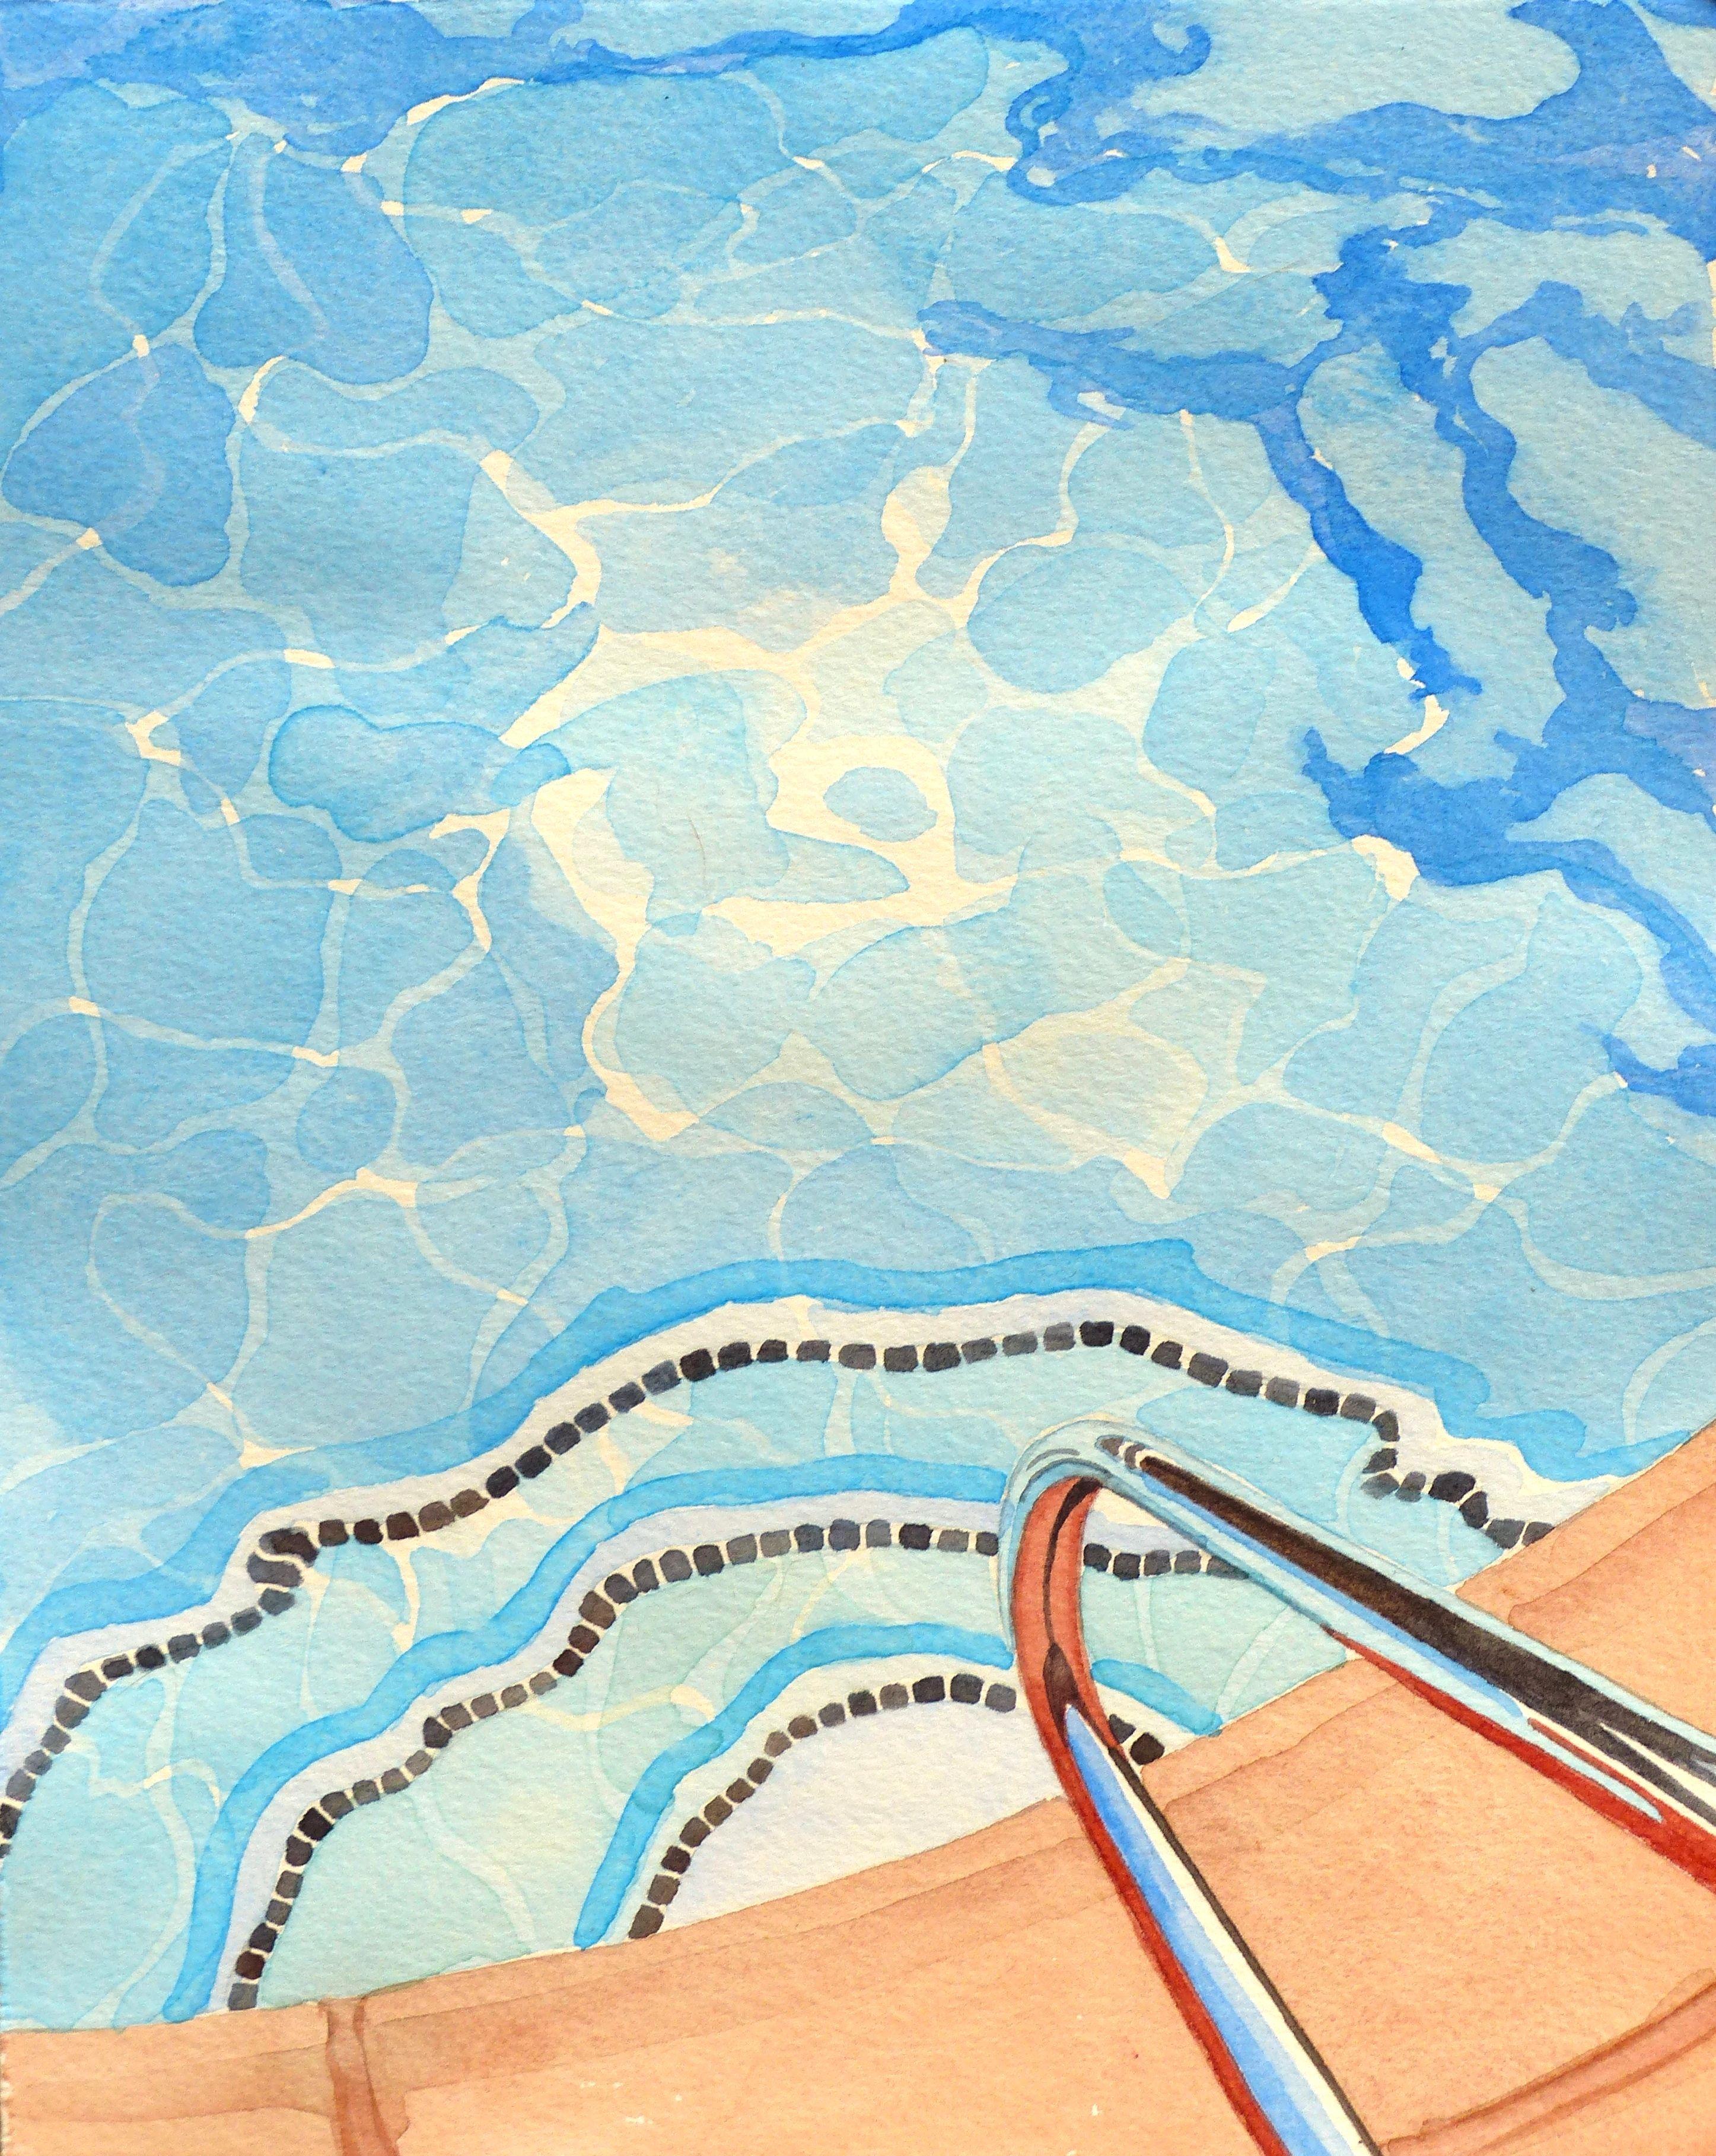 Sun Patterns in the Pool, Painting, Watercolor on Watercolor Paper - Art by Leslie White